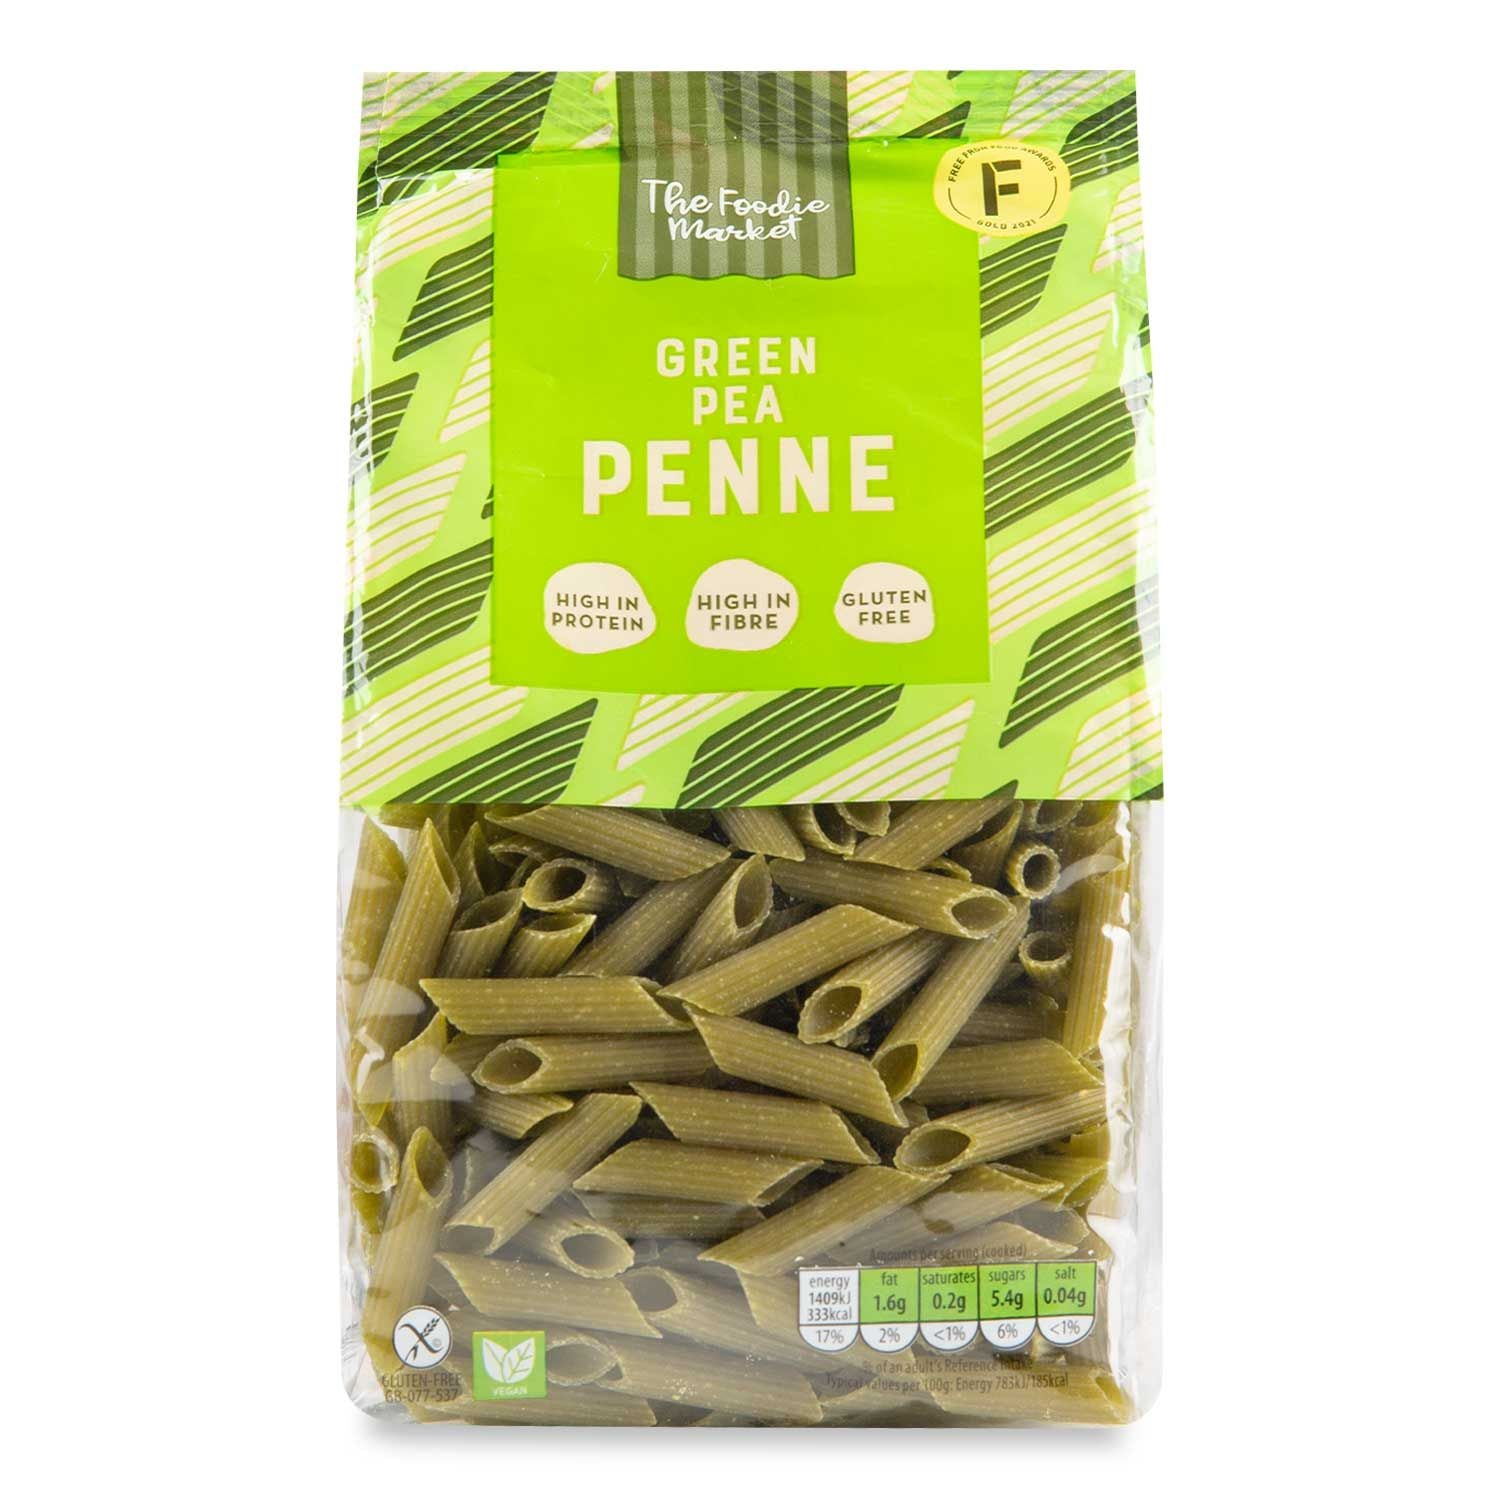 The Foodie Market Gluten Free Green Pea Penne 250g